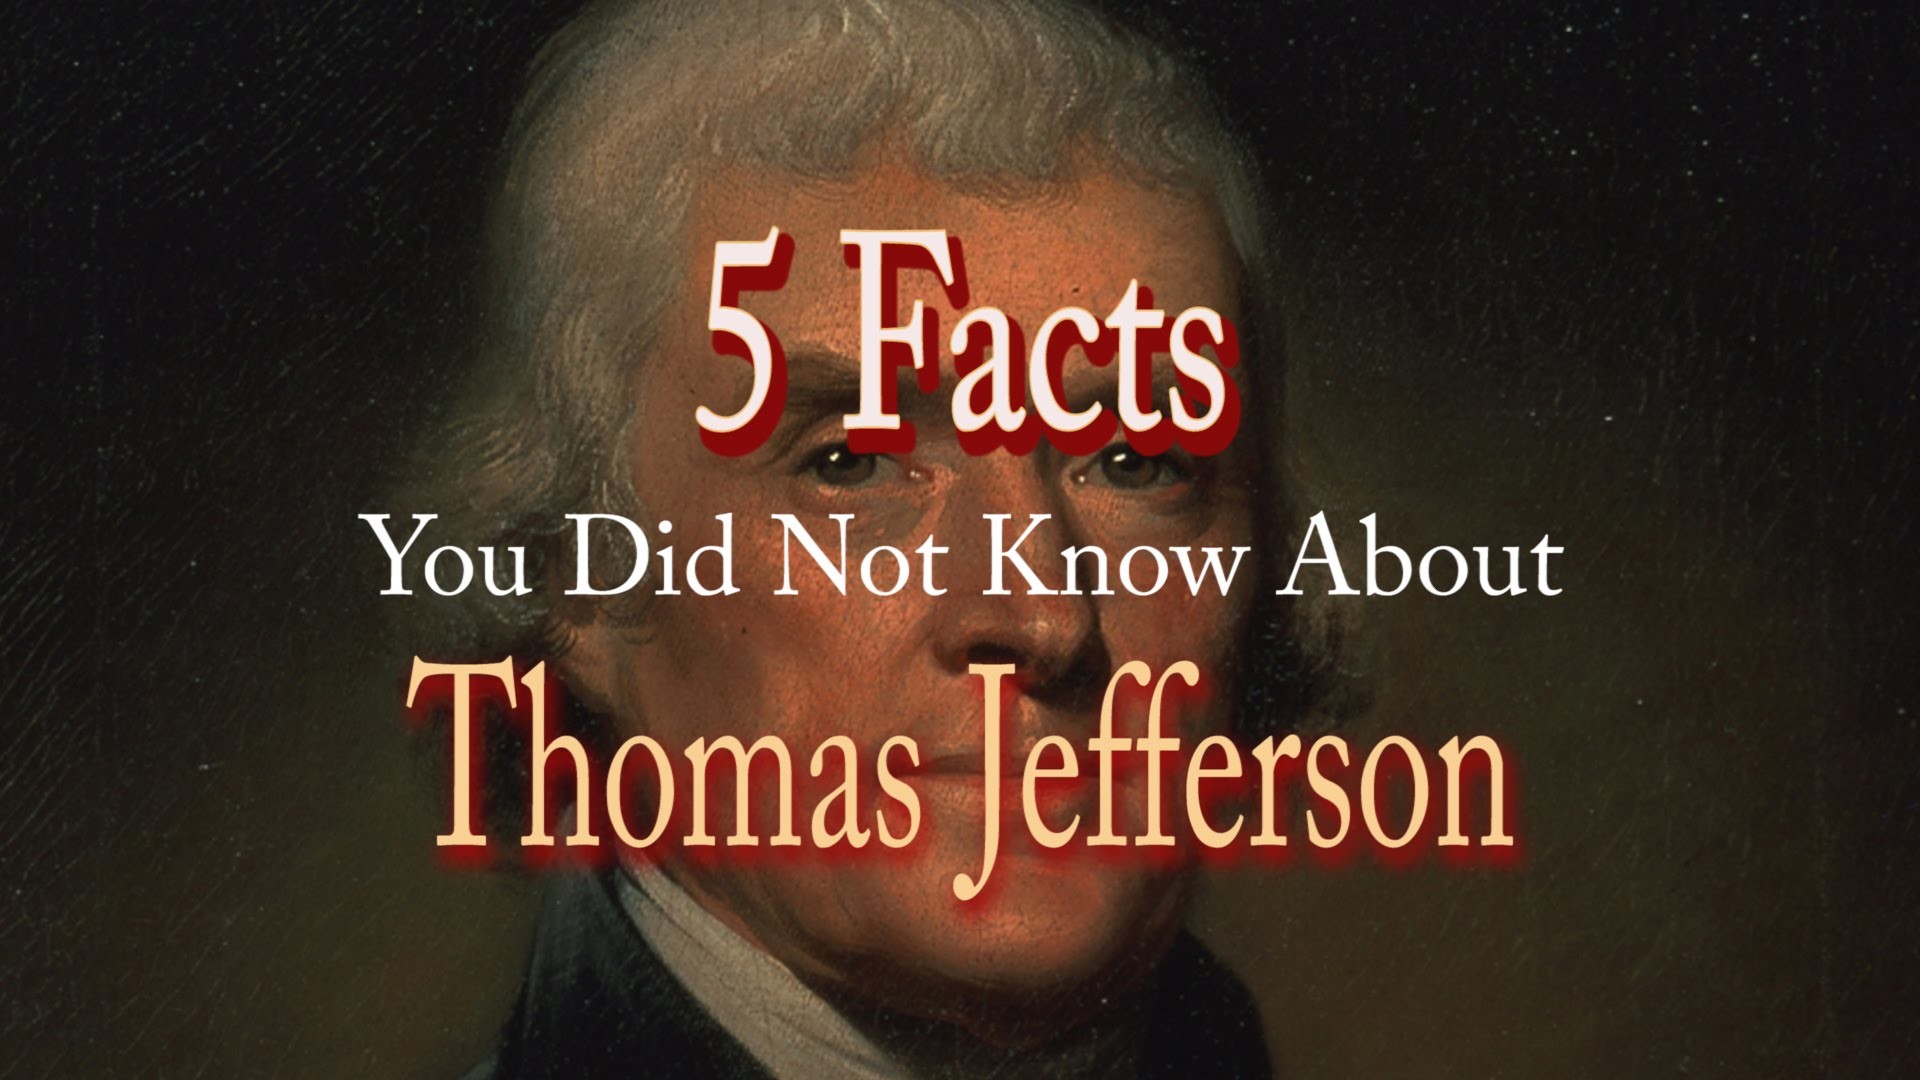 1920x1080 5 Facts You Did Not Know About Thomas Jefferson